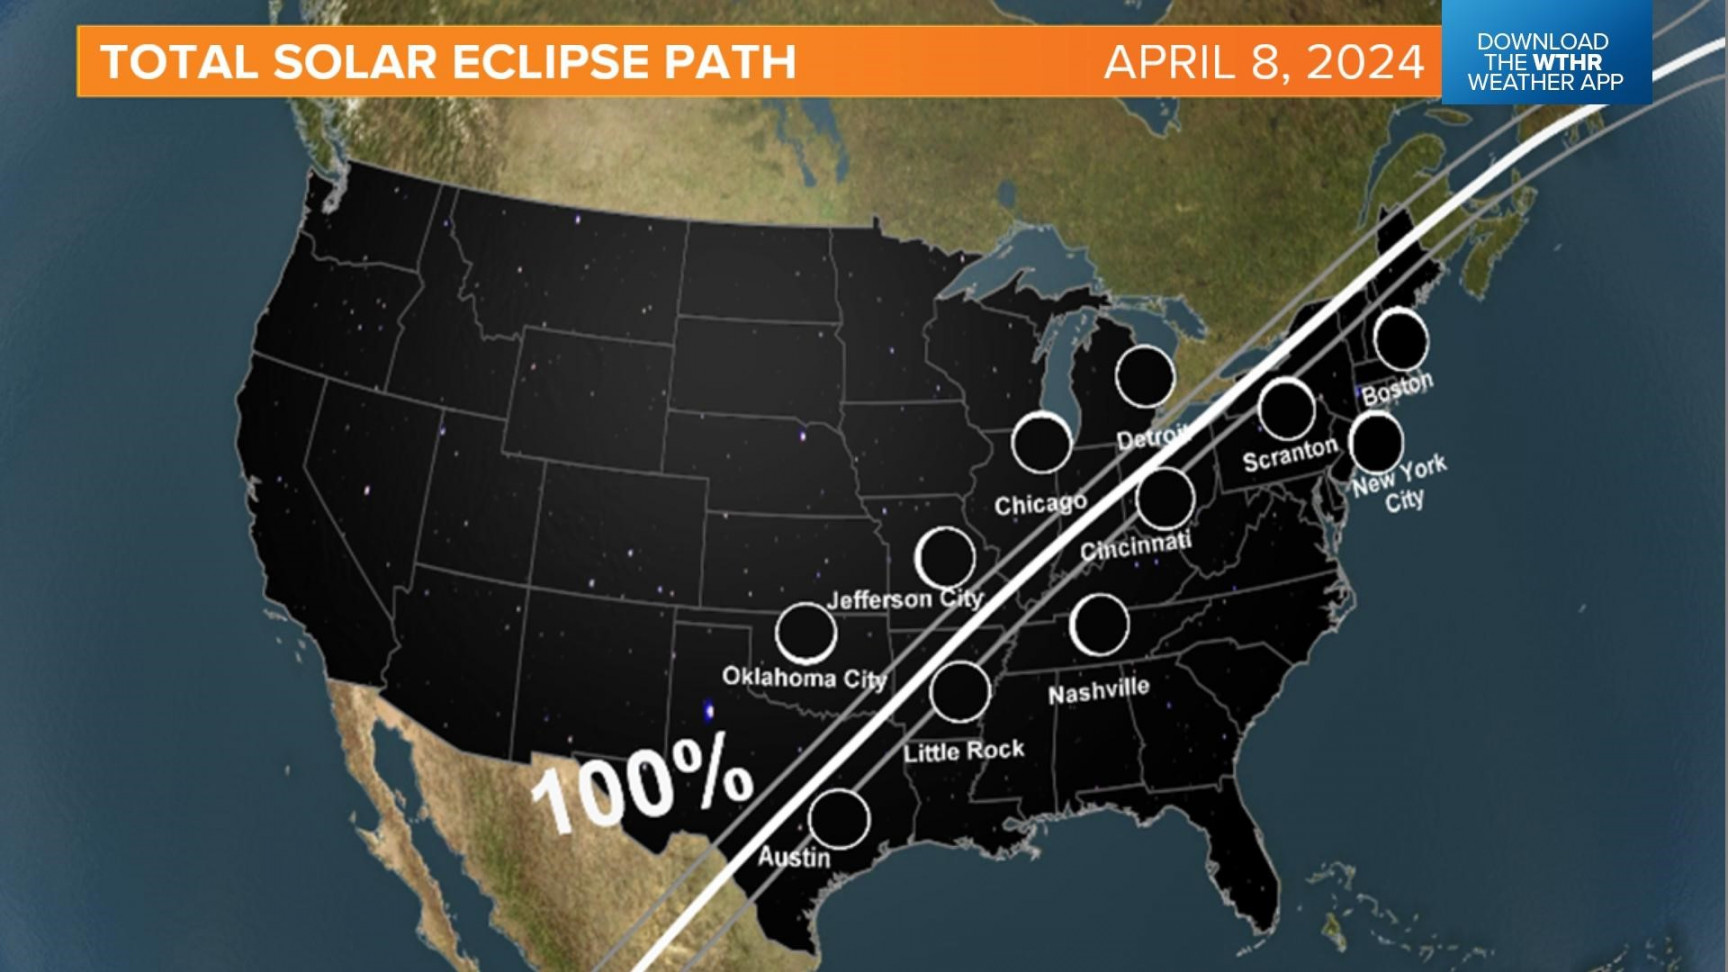 Total solar eclipse totality for Indiana in